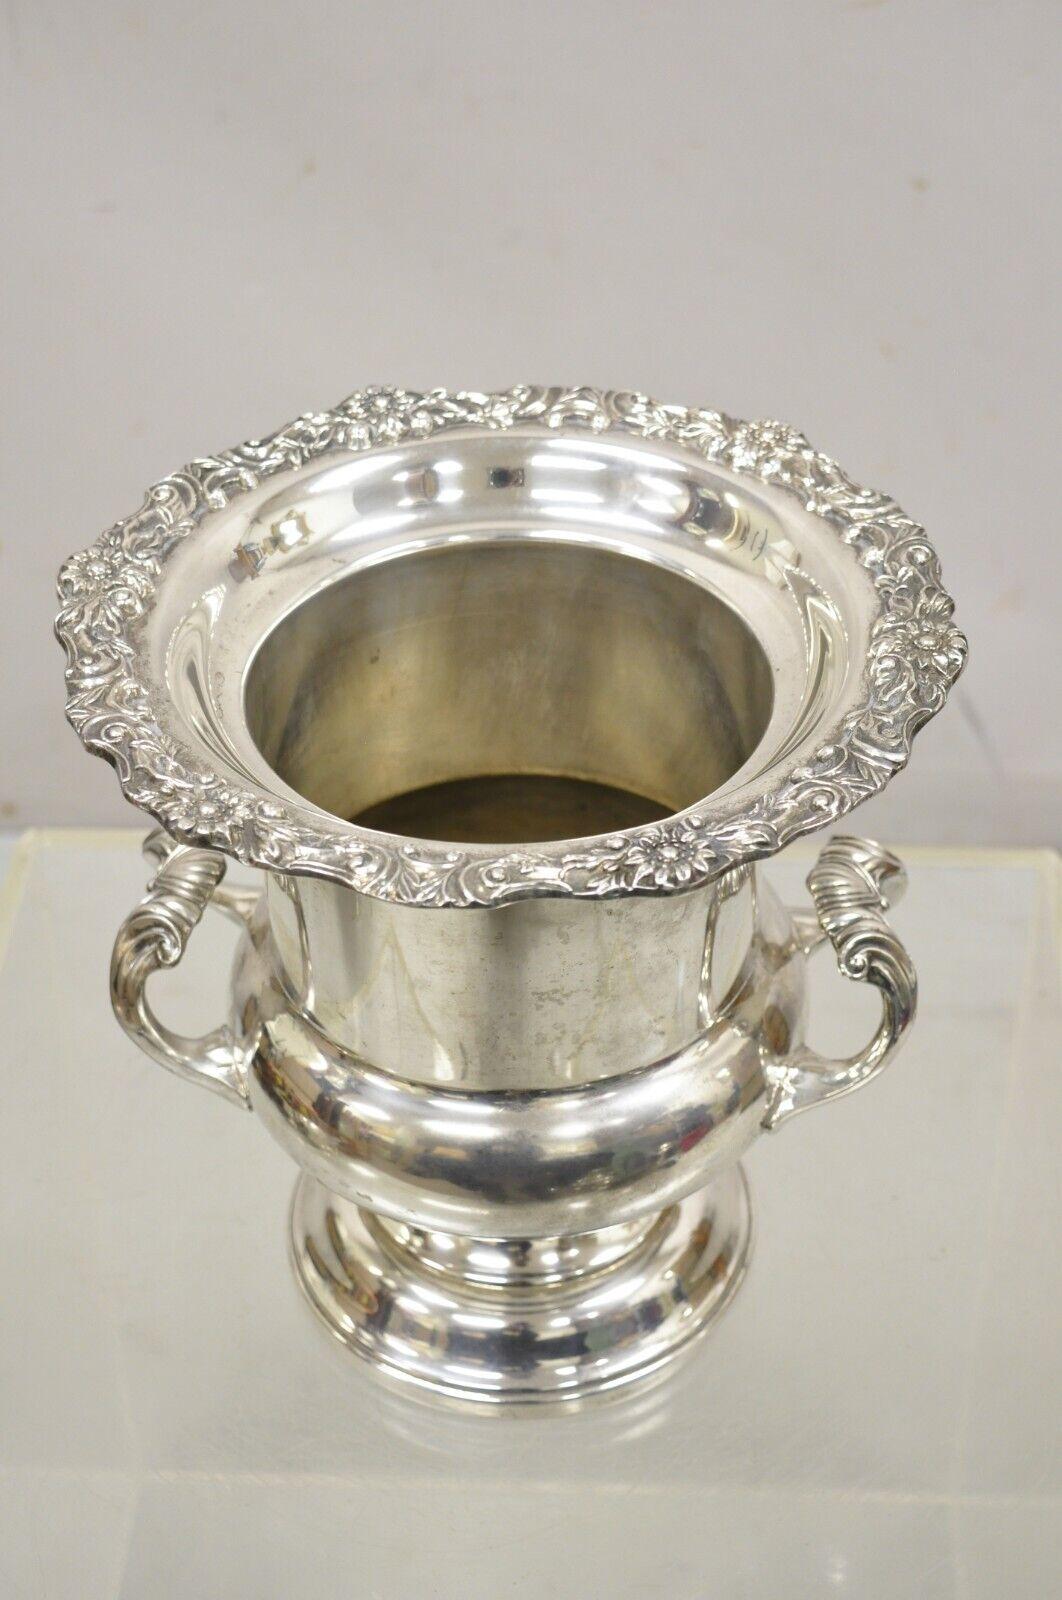 Vintage FB Rogers Silver Plated Trophy Cup Champagne Bucket Wine Chiller. Item features ornate twin handles, a decorated scalloped rim. circa Early to Mid-20th Century. Measurements: 10